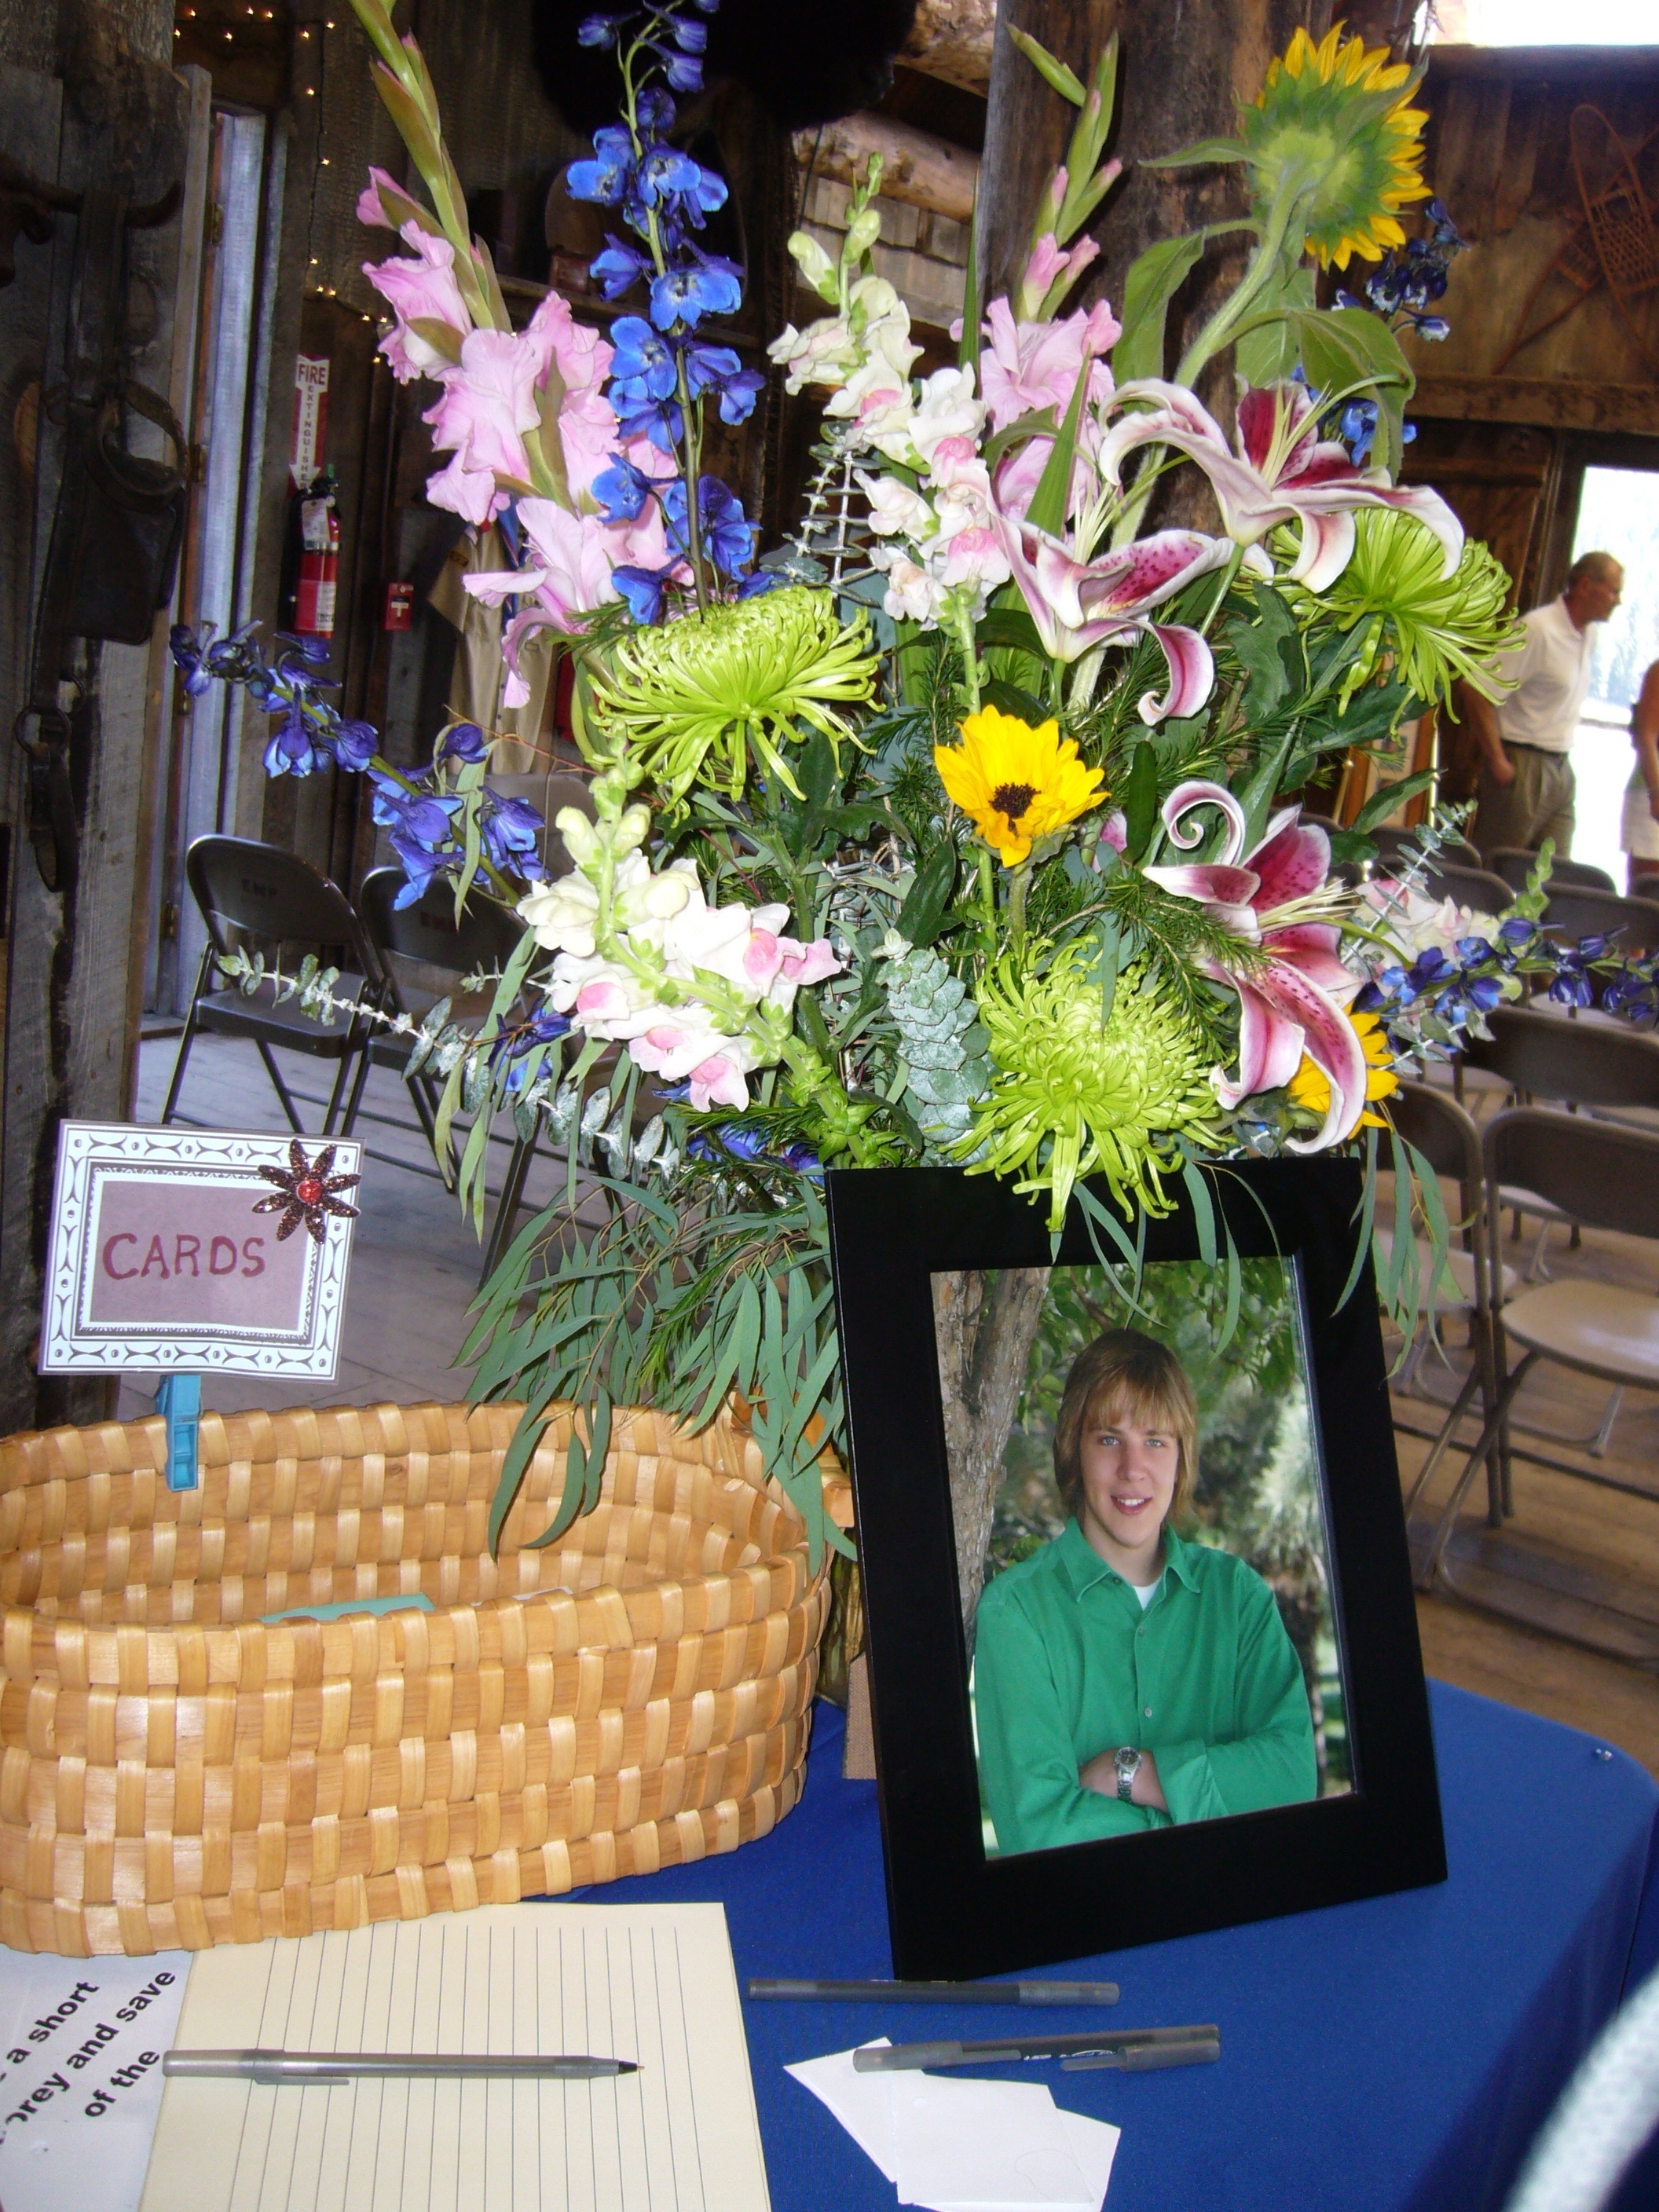 Corey McClymonds Sr. Picture with Flowers image